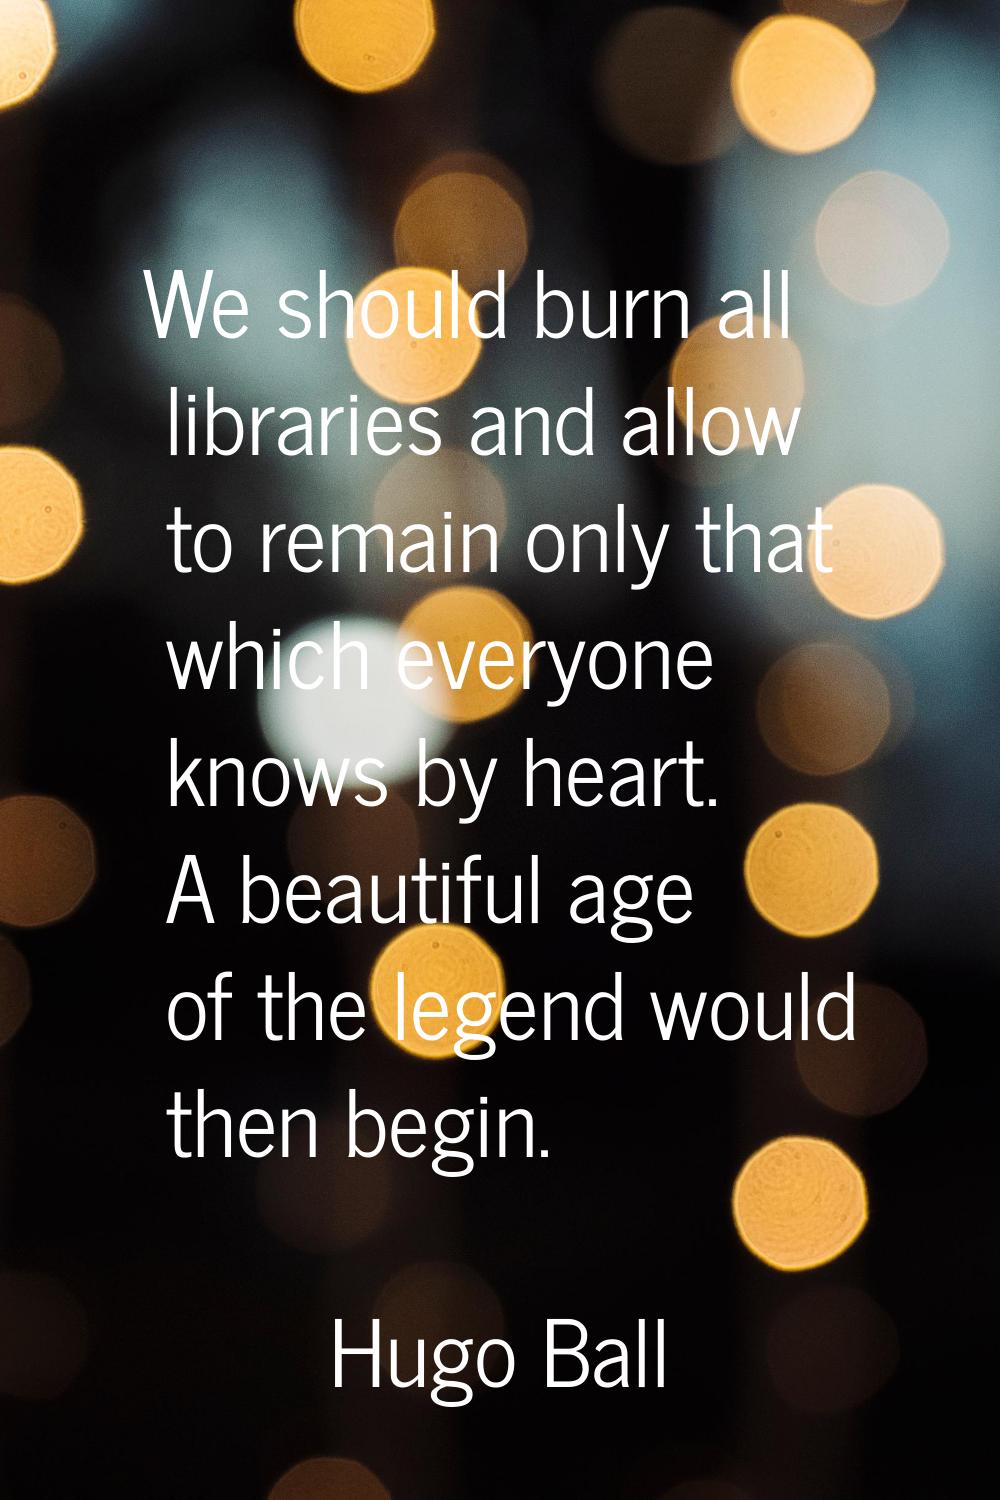 We should burn all libraries and allow to remain only that which everyone knows by heart. A beautif